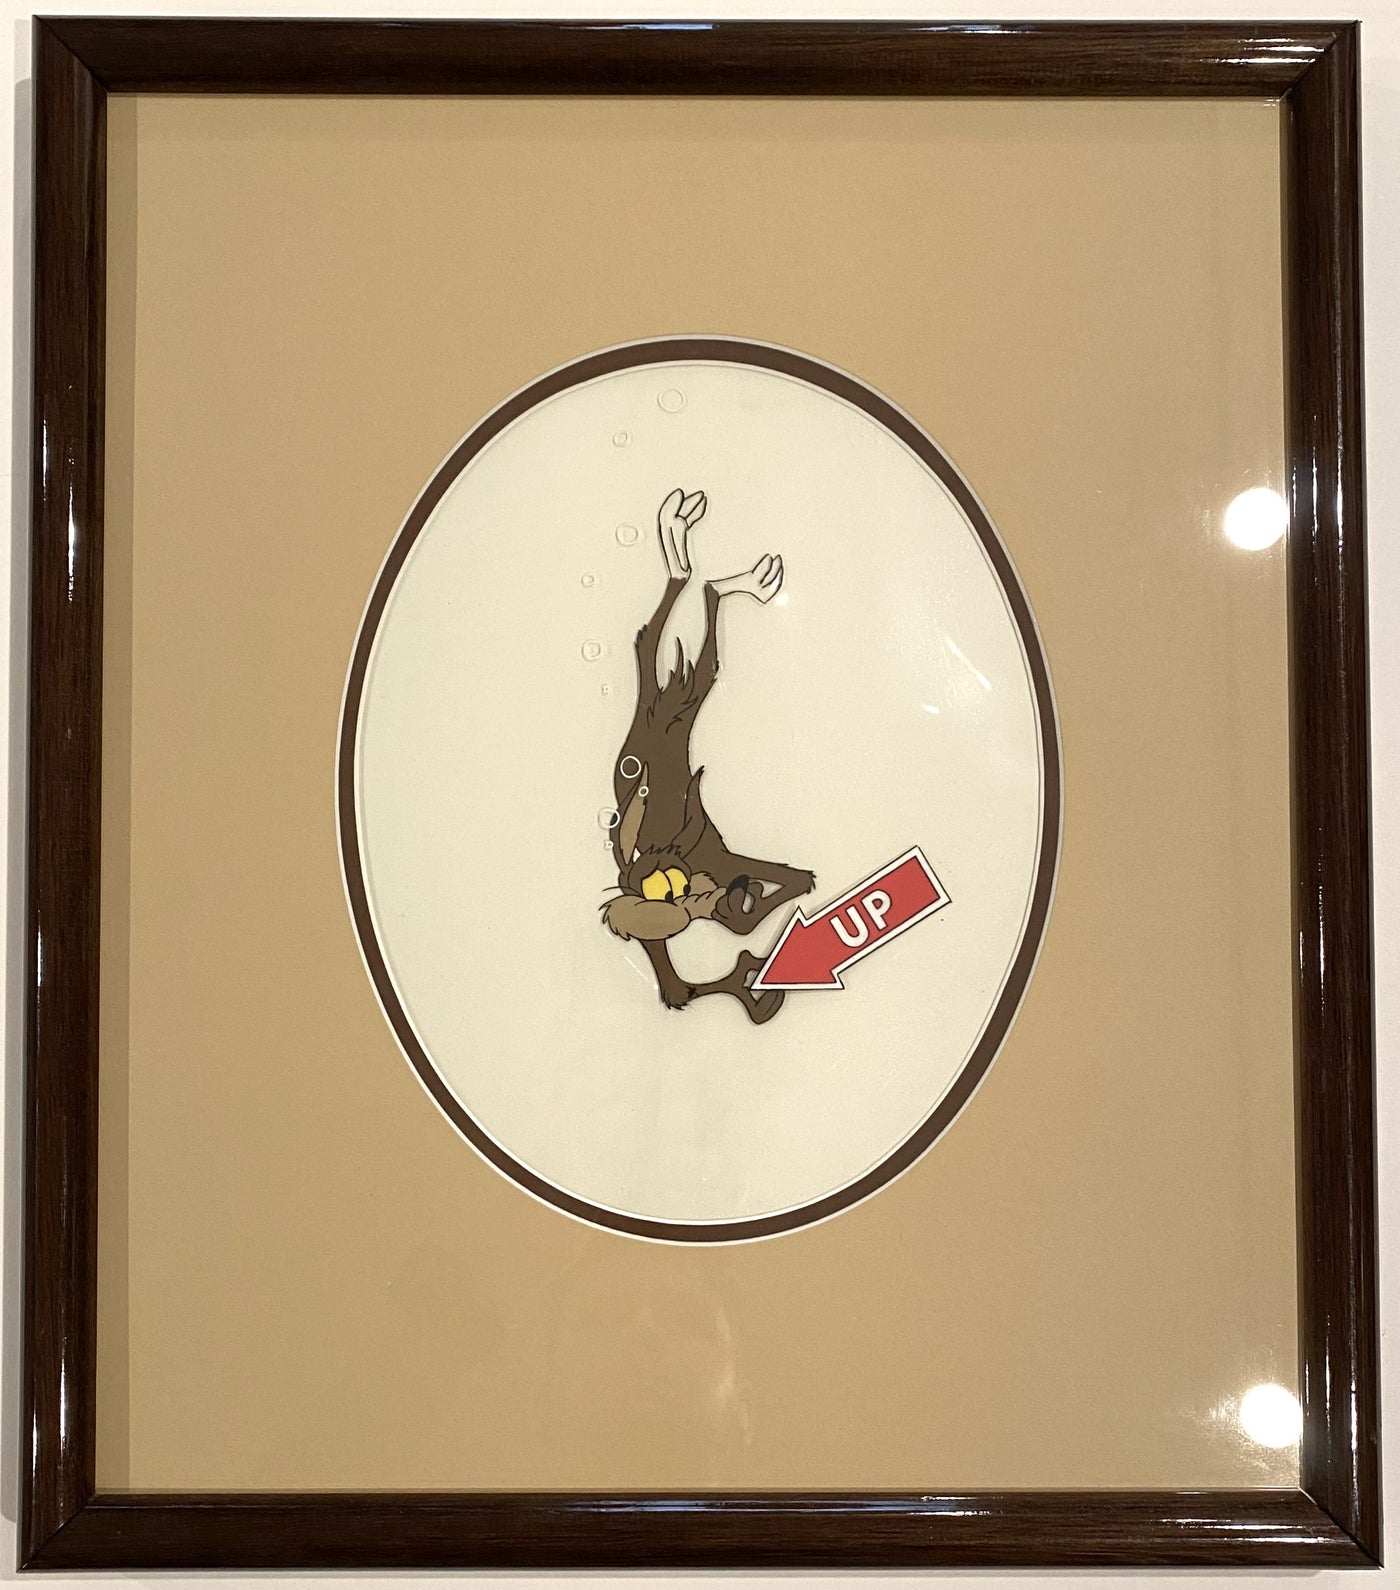 Original Warner Brothers Production Cel Featuring Wile E. Coyote